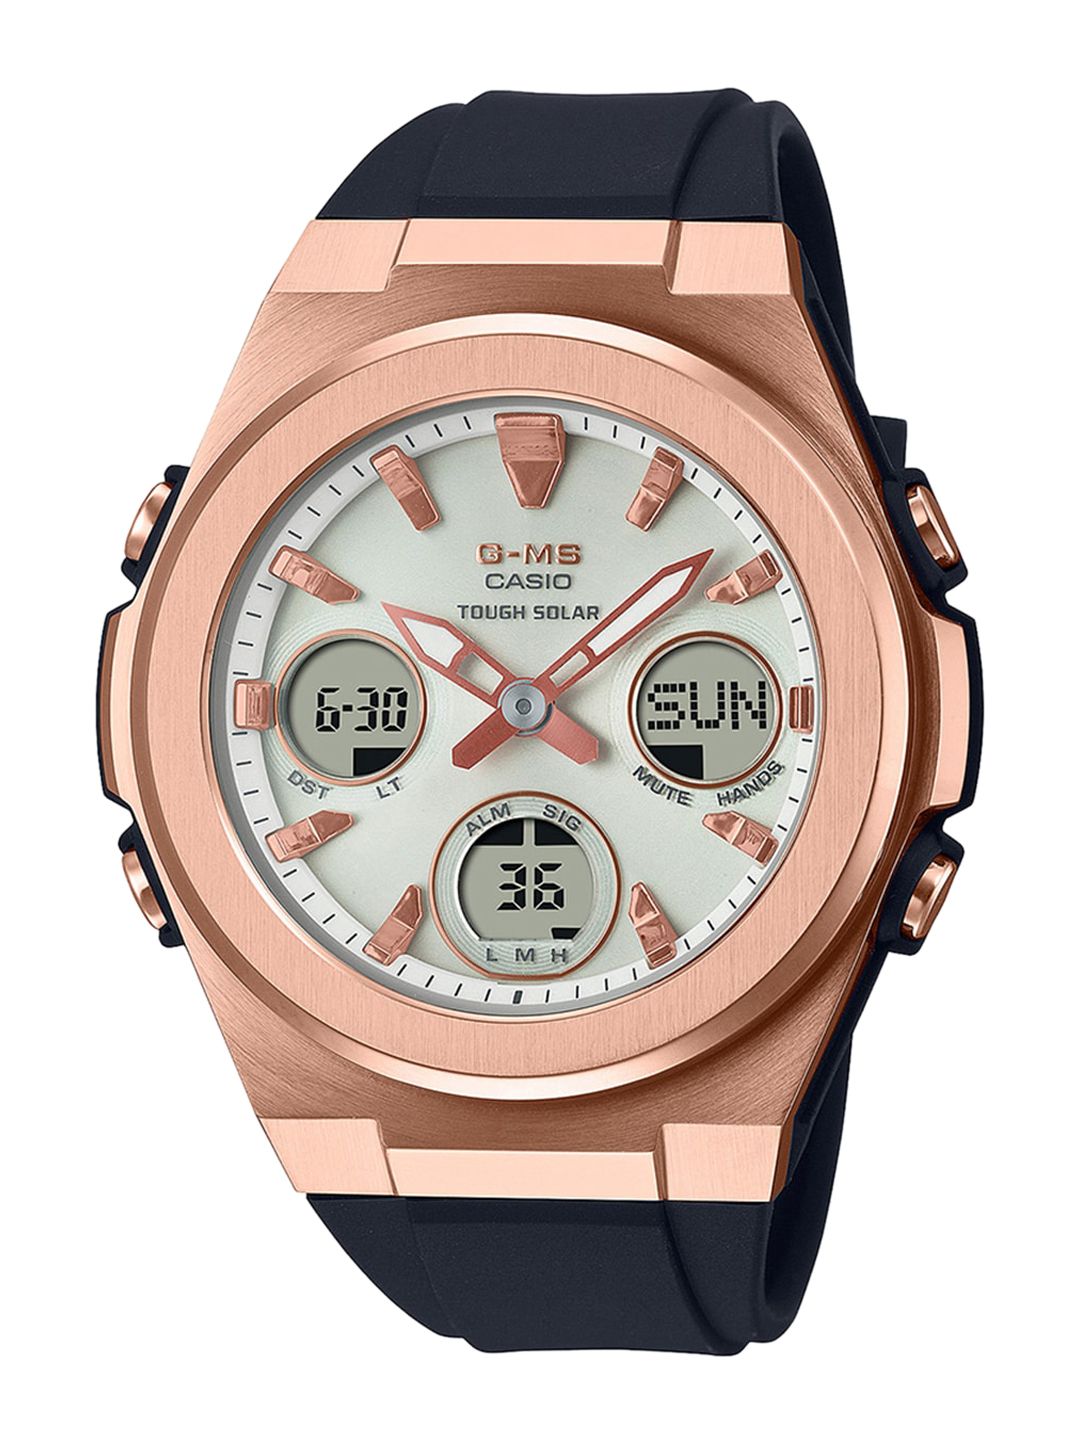 CASIO Women Silver-Toned & Rose Gold Analogue Watch Price in India